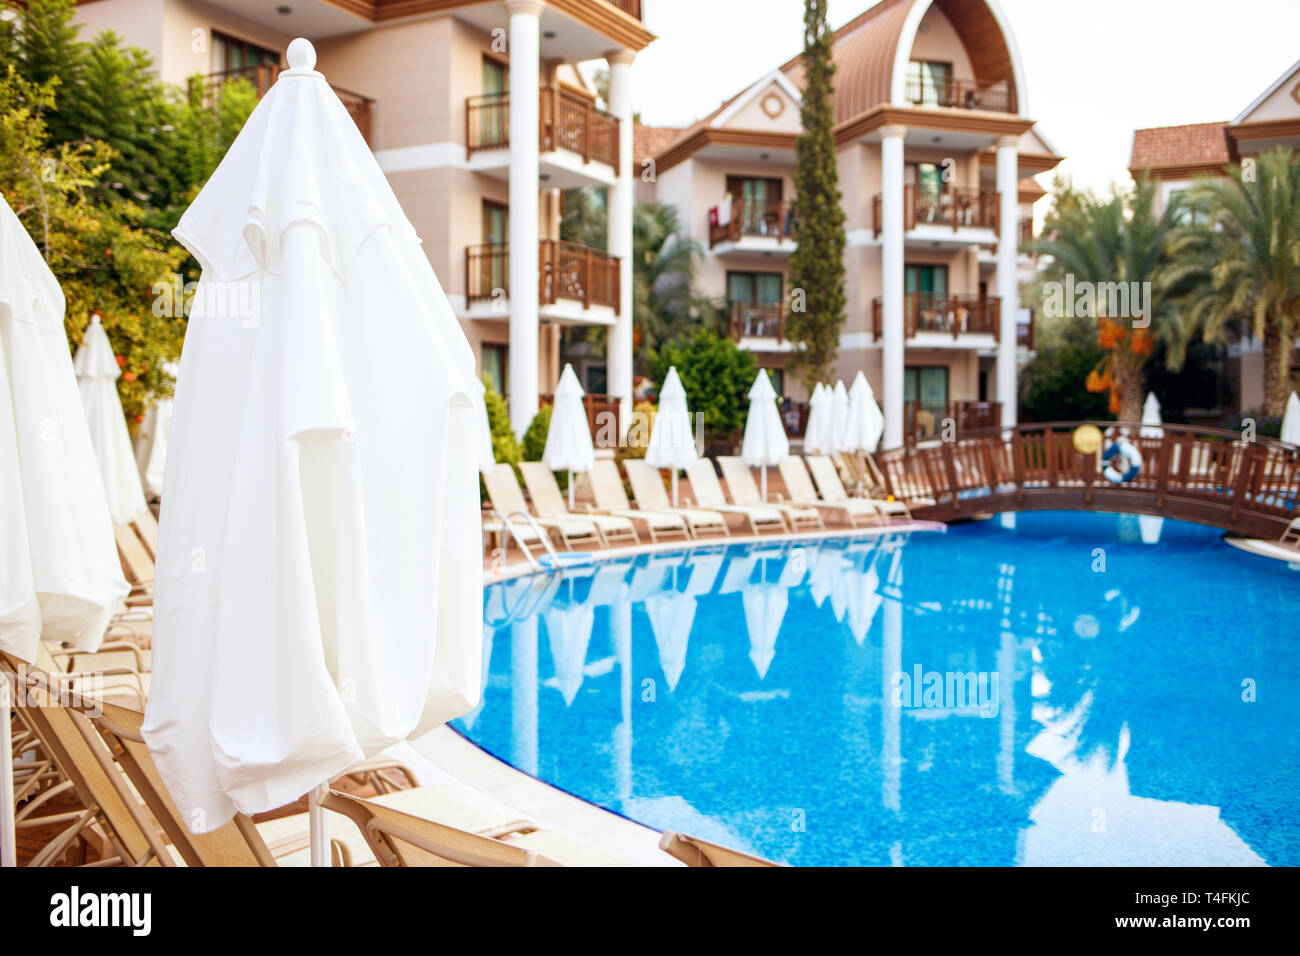 Swimming pool in front of hotel. Stock Photo